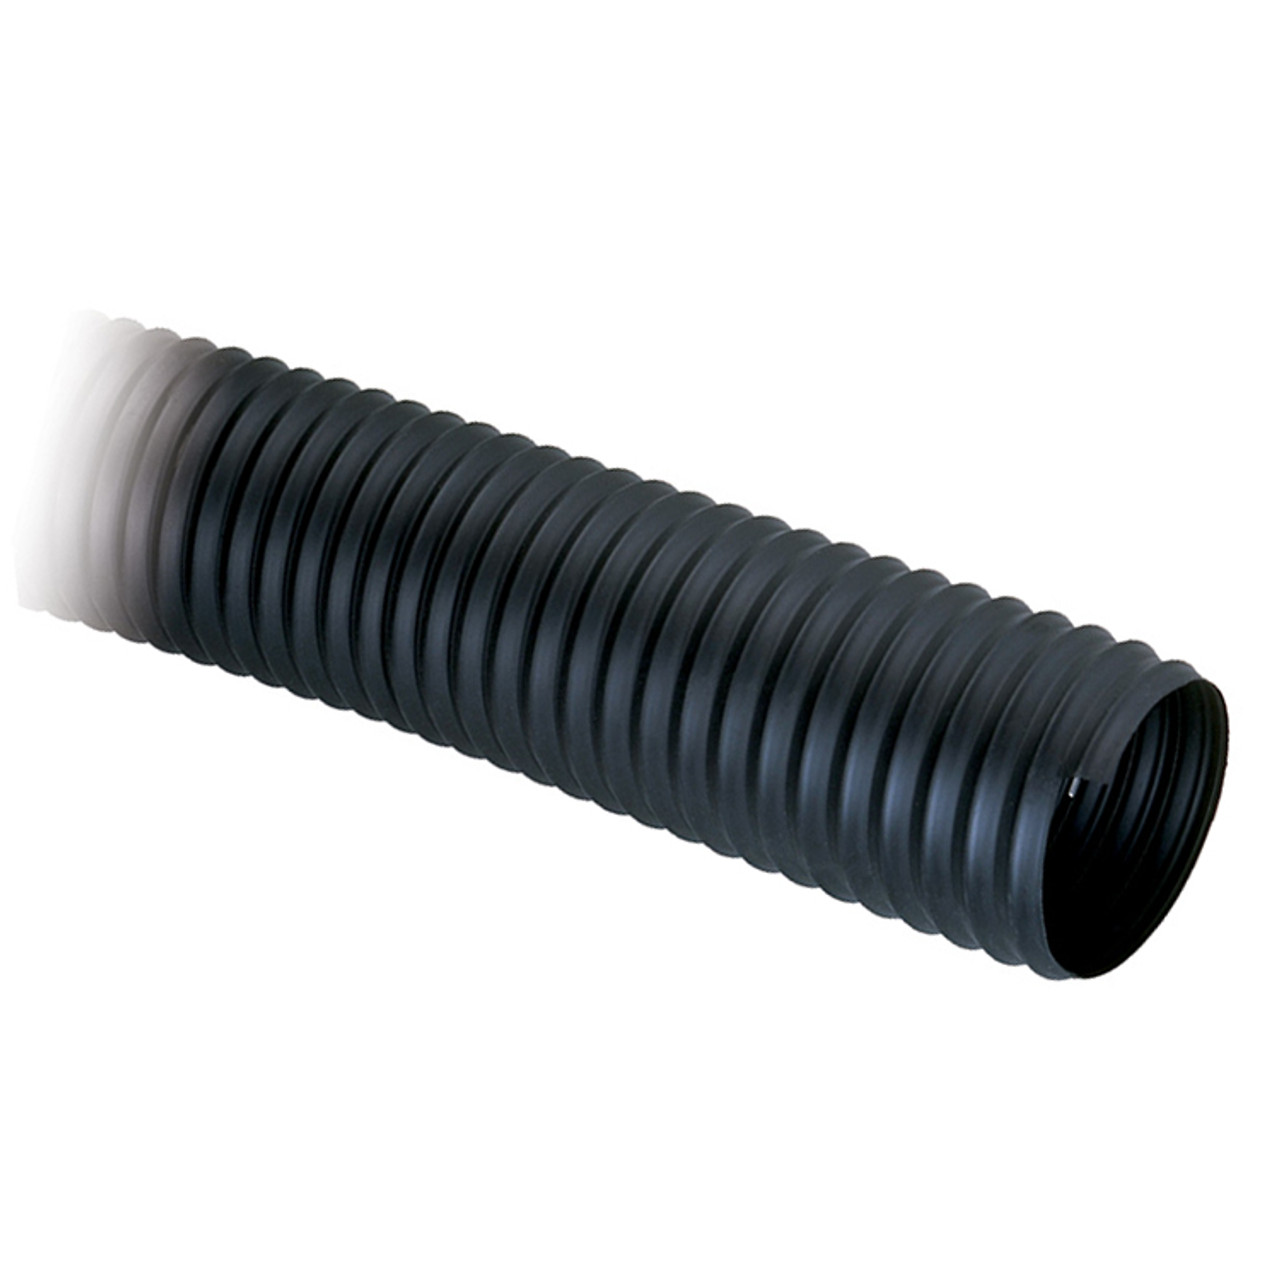 10" Thermoplastic Rubber Ducting Hose   TPR-1000